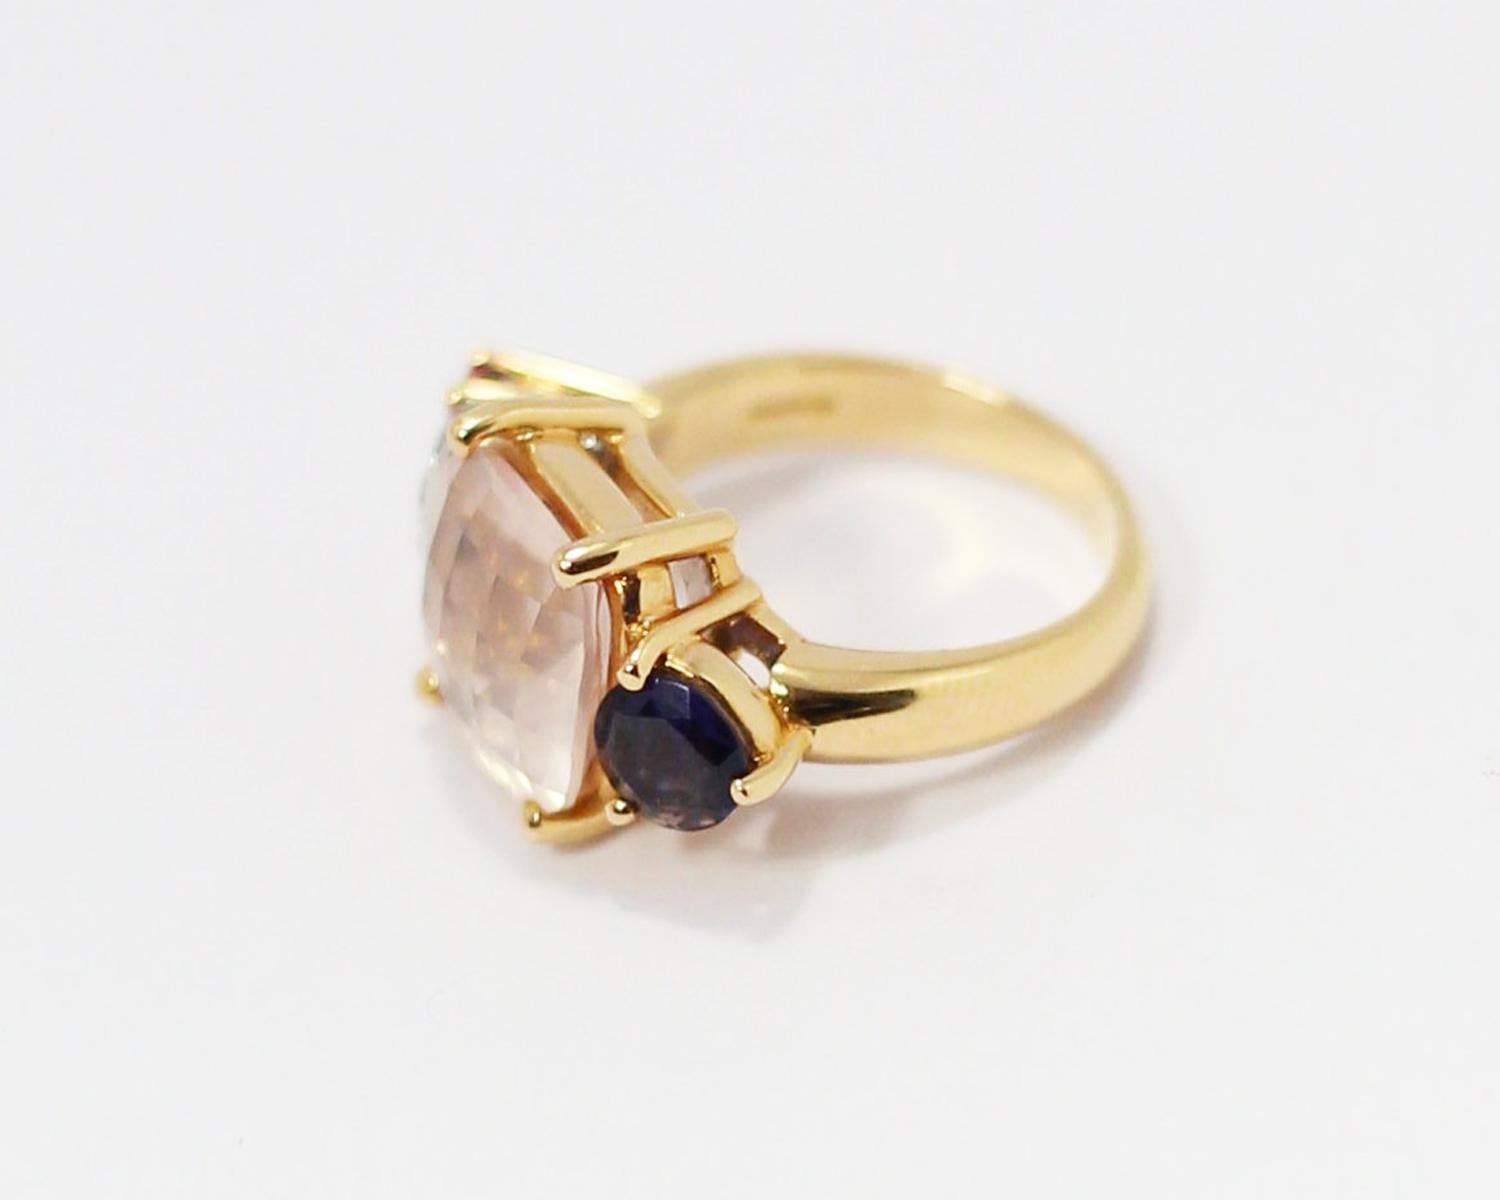 Contemporary Mangiarotti Moonstone, Sapphire, Pink Tourmaline Ring in 18kt Gold and Diamonds